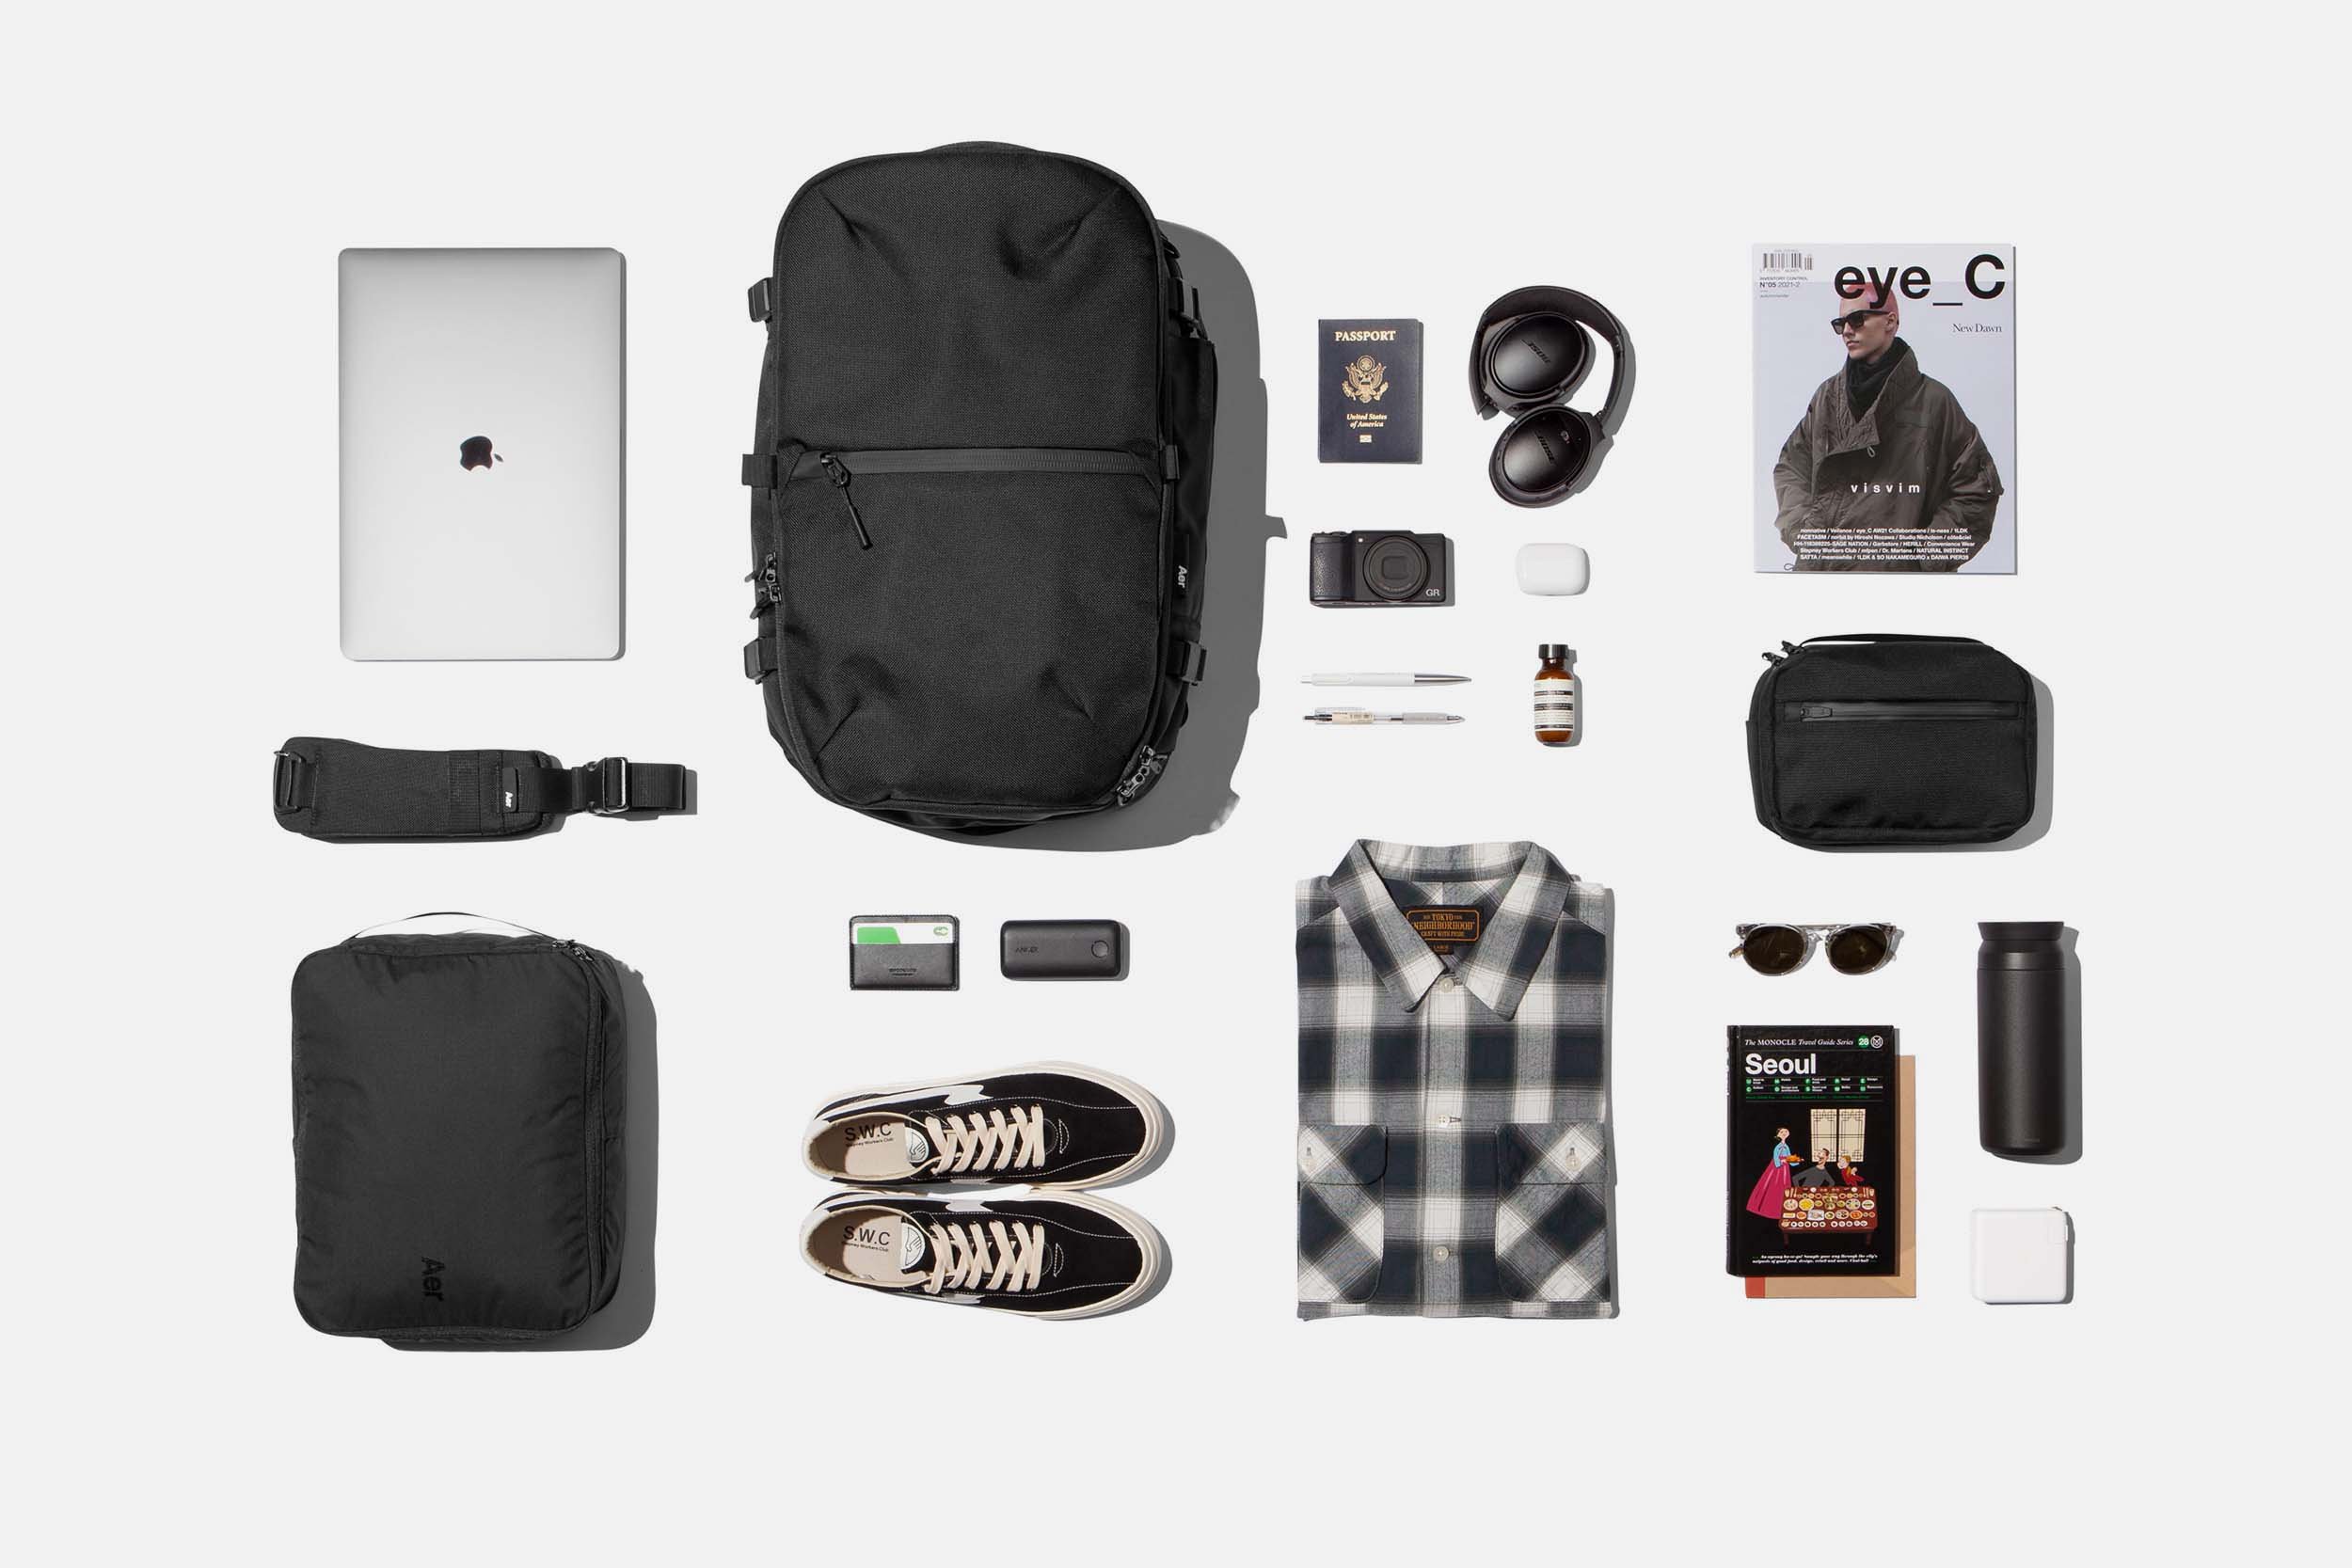 AER_travelcollection3_travelpack3_layout.jpg